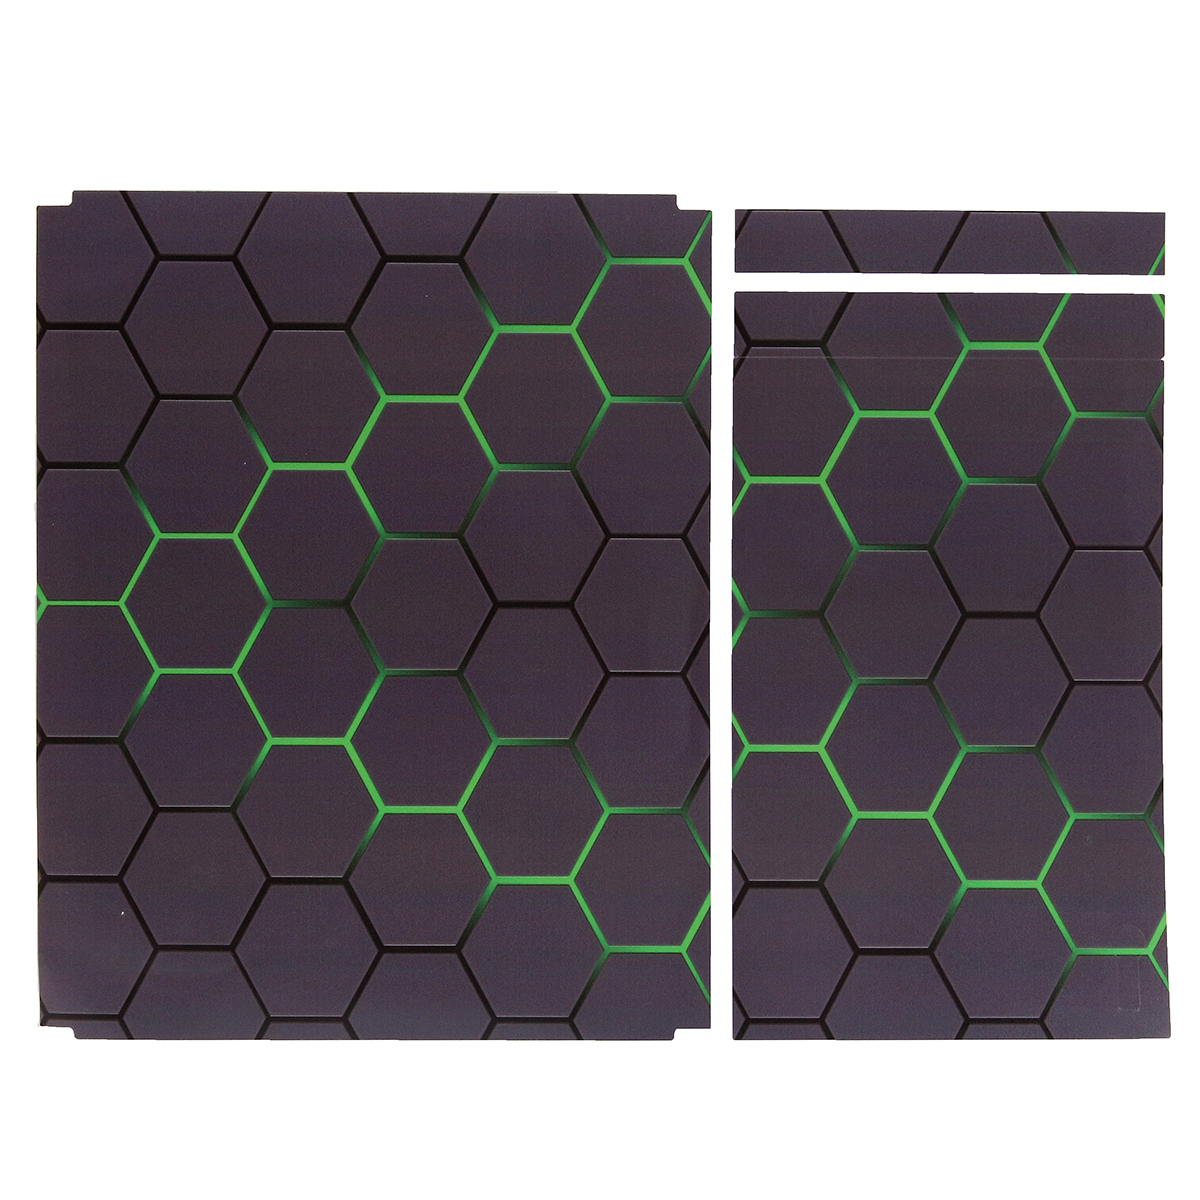 Green Grid Vinyl Decal Skin Stickers Cover for Xbox One S Game Console&2 Controllers 9